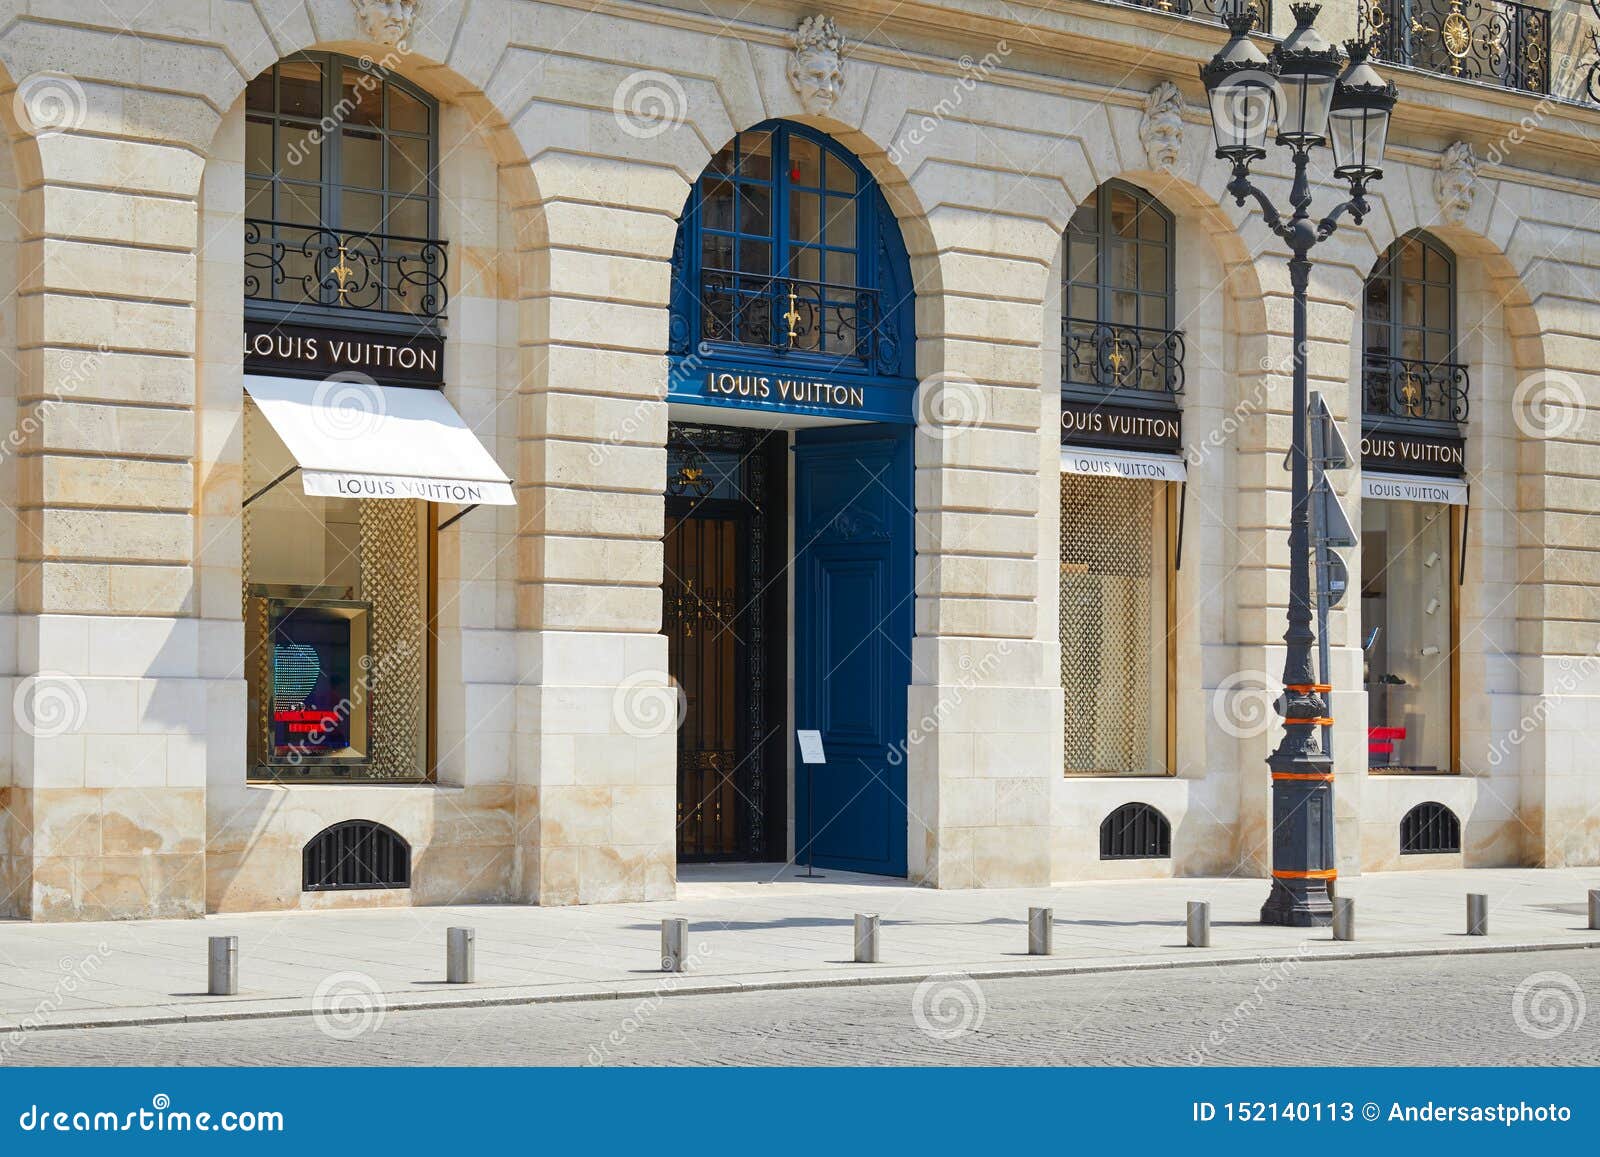 Louis Vuitton Returns Home Store Opened At Place Vendôme  The Editors  Club  The Editors Club